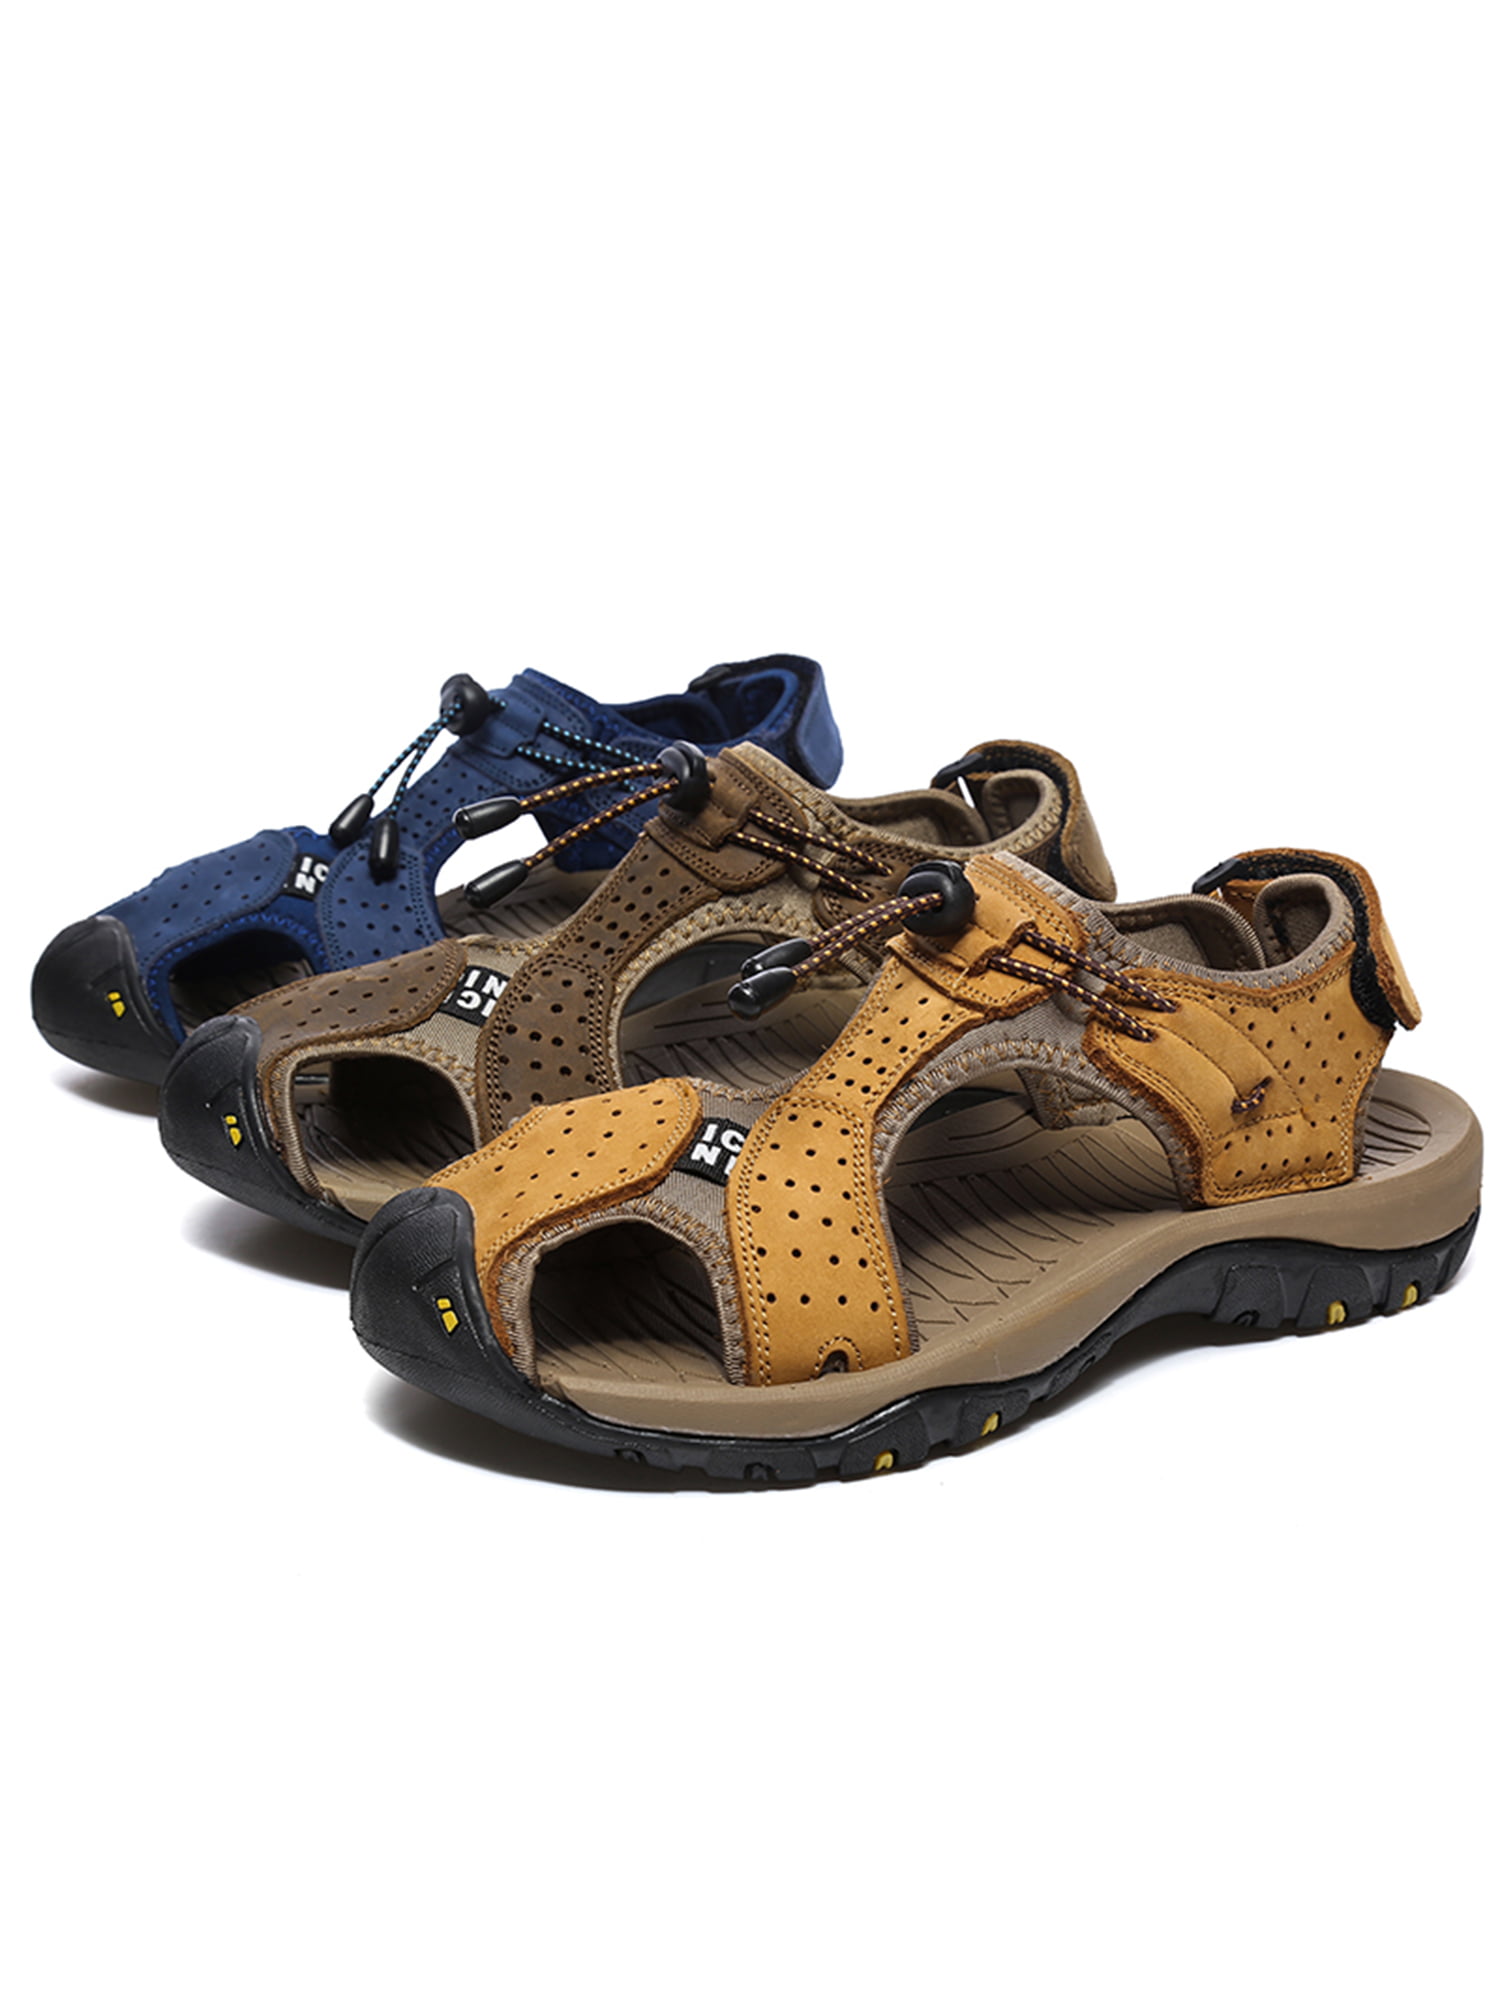 Mens Summer Hiking Leather Sandals Wading Closed Toe Fisherman Comfy Beach Shoes 